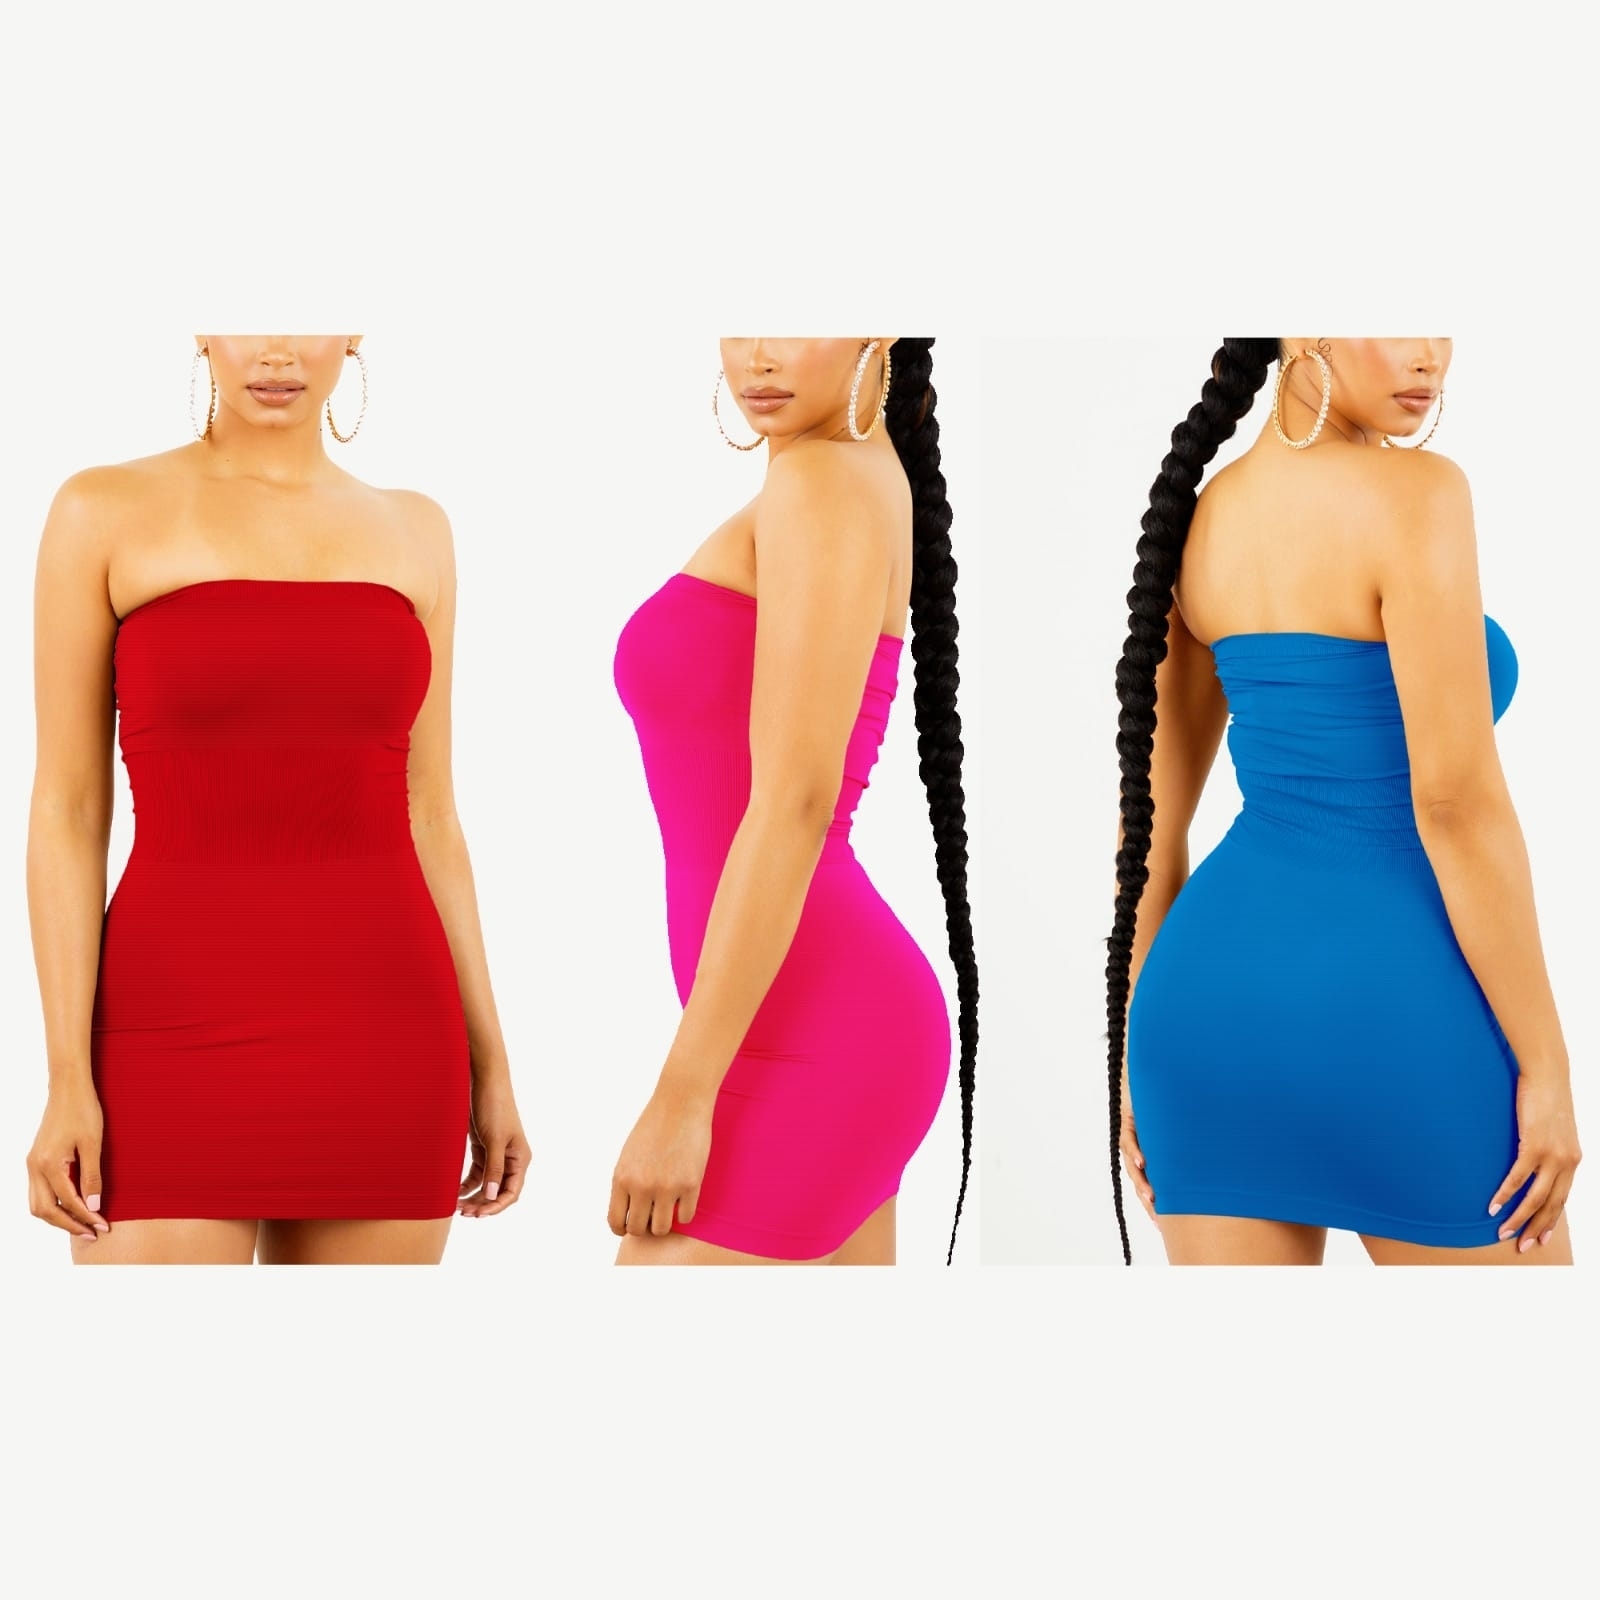 2-Pack Women's Strapless Stretchy Tight Fit Seamless Body Con Mini Tube Top Dress - RED, S